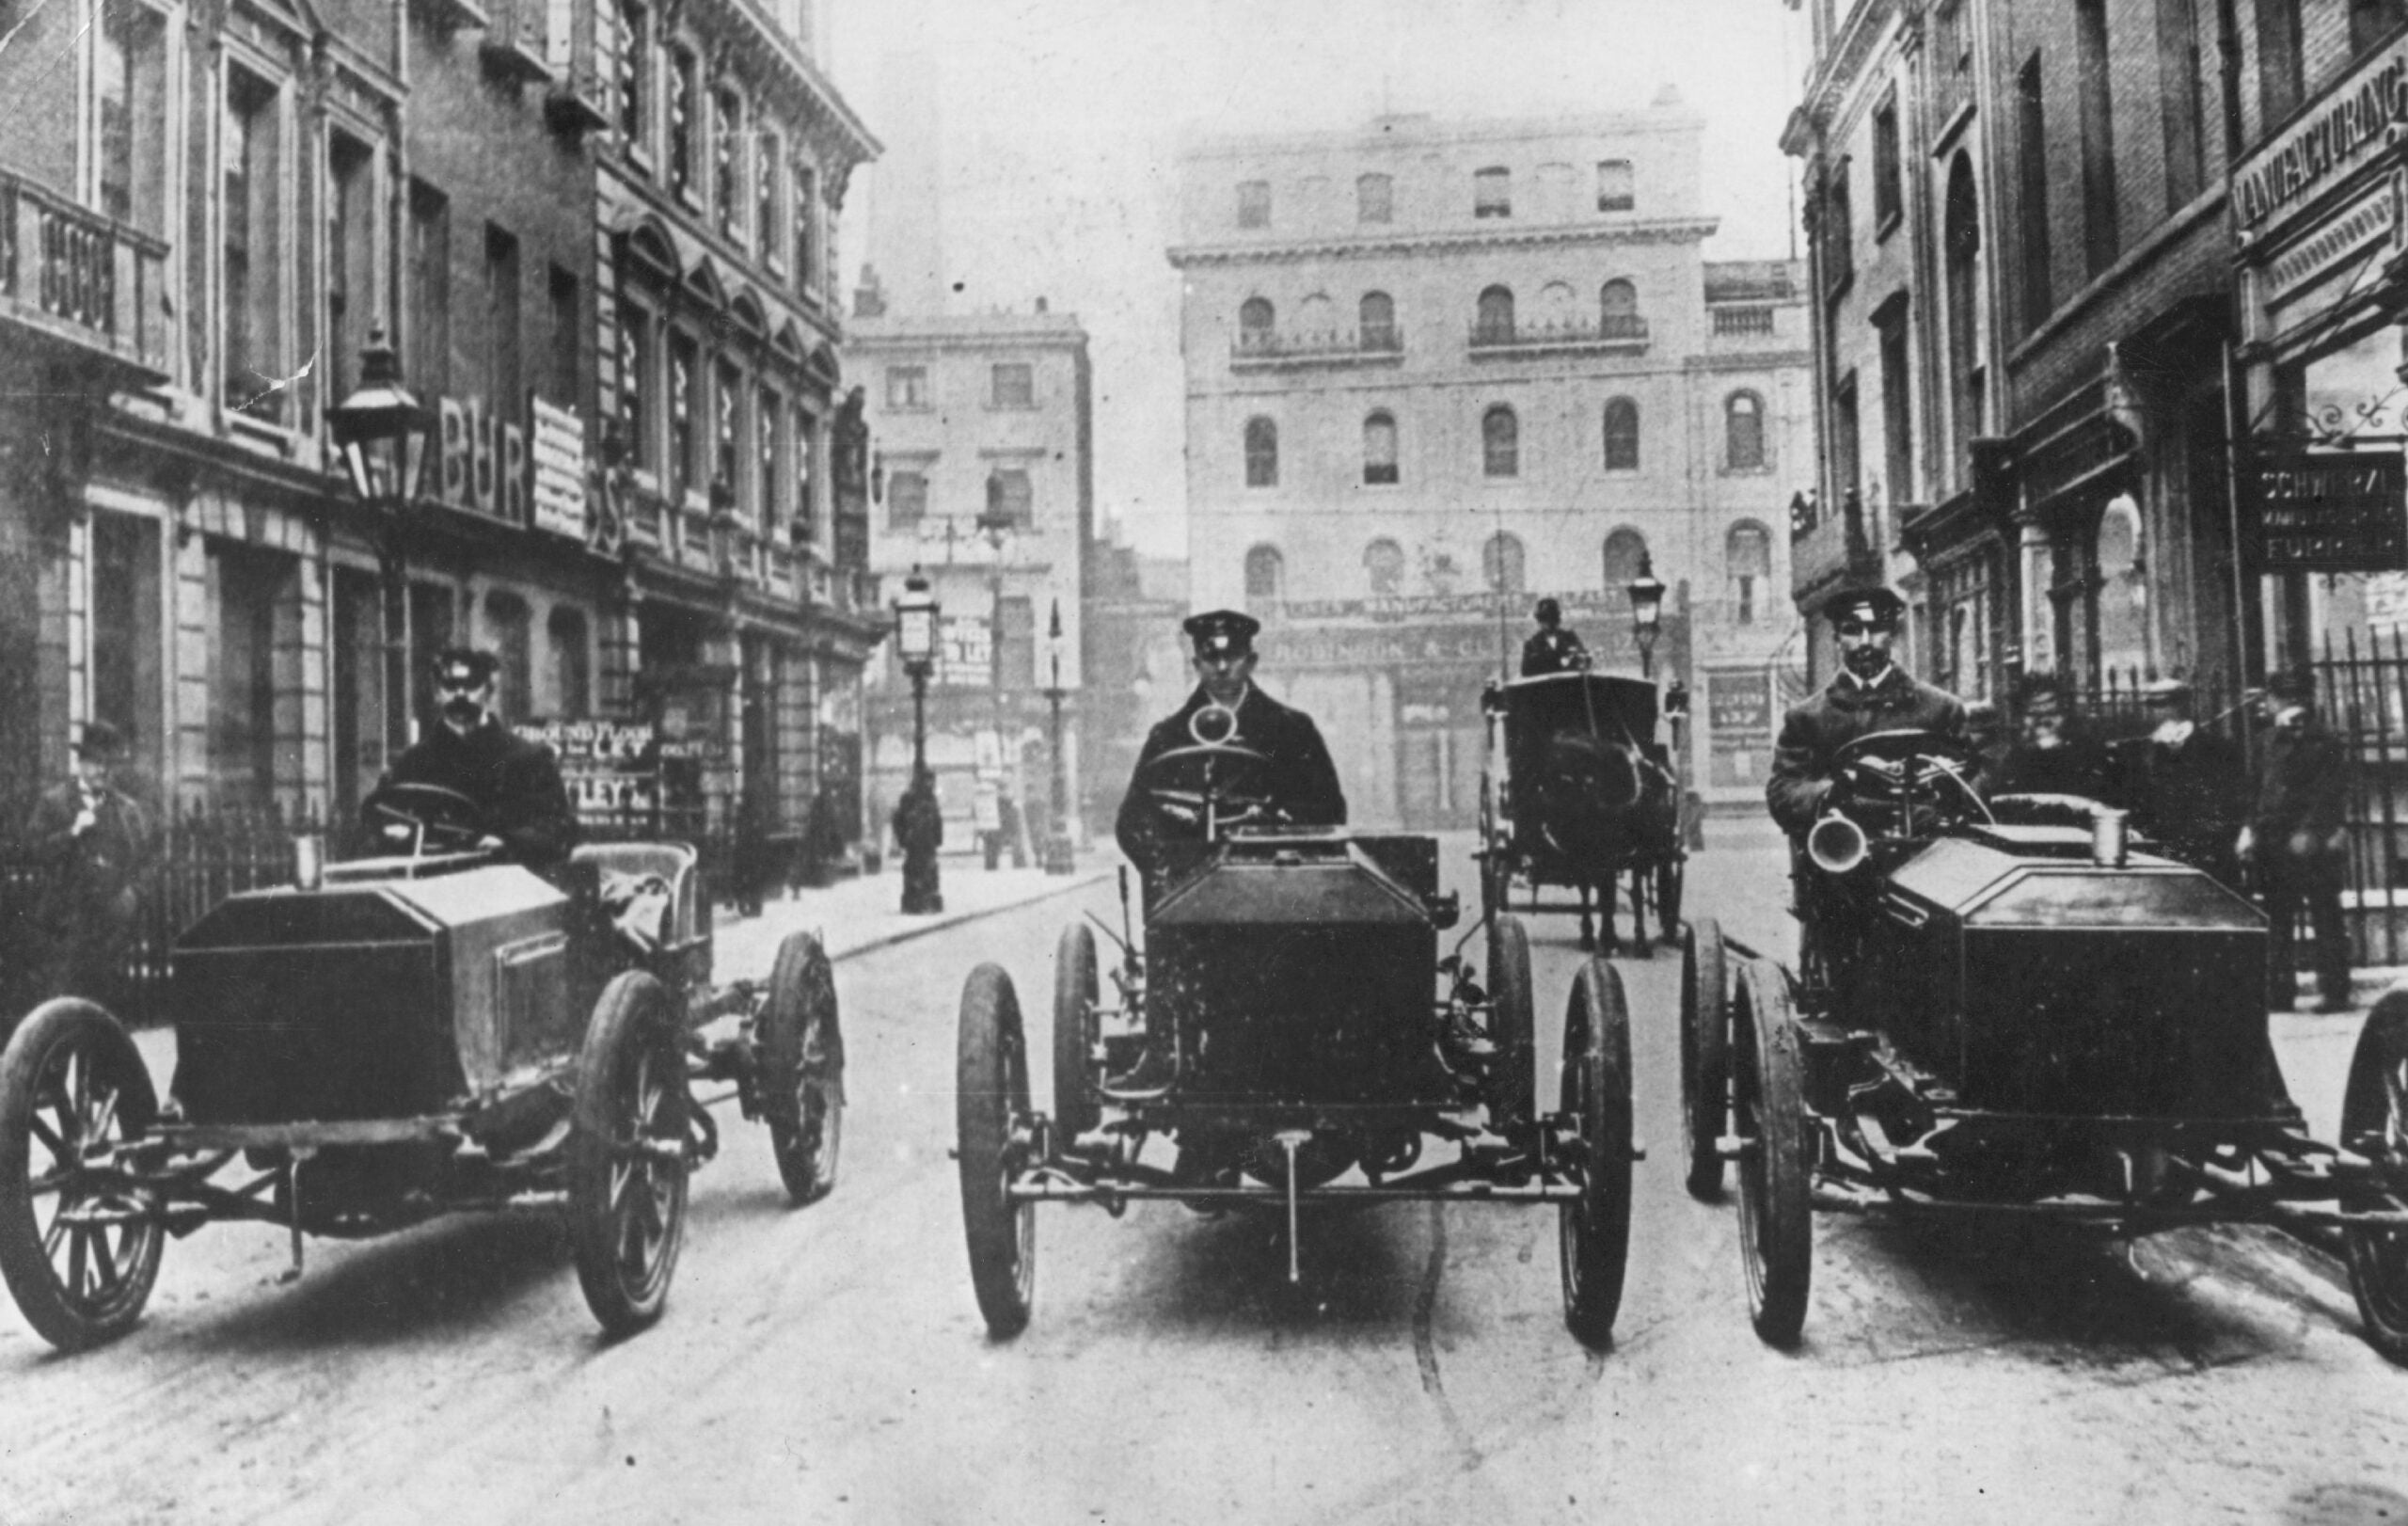 1903:  The Napier team for the Gordon Bennett motor car race of 1903 (left to right) Stock, Farrott and Edge.  (Photo by Hulton Archive/Getty Images)